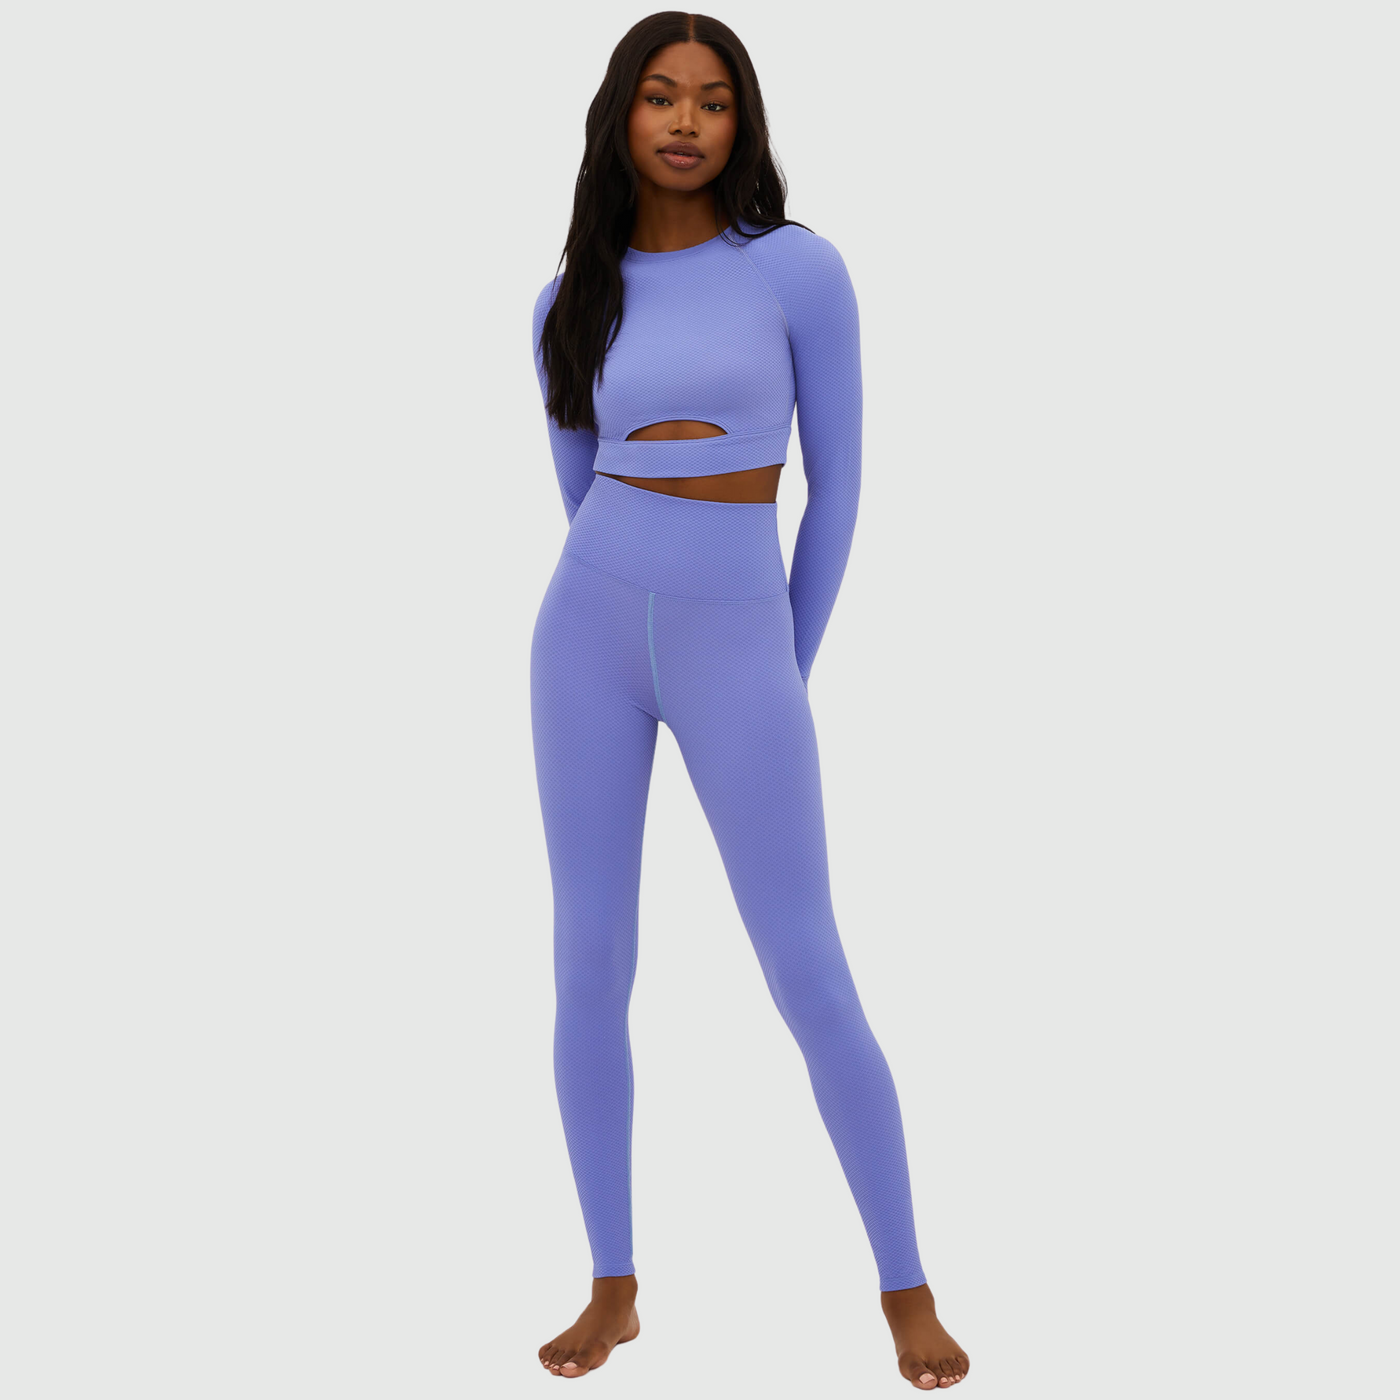 Beach Riot Legging in Periwinkle Waffle